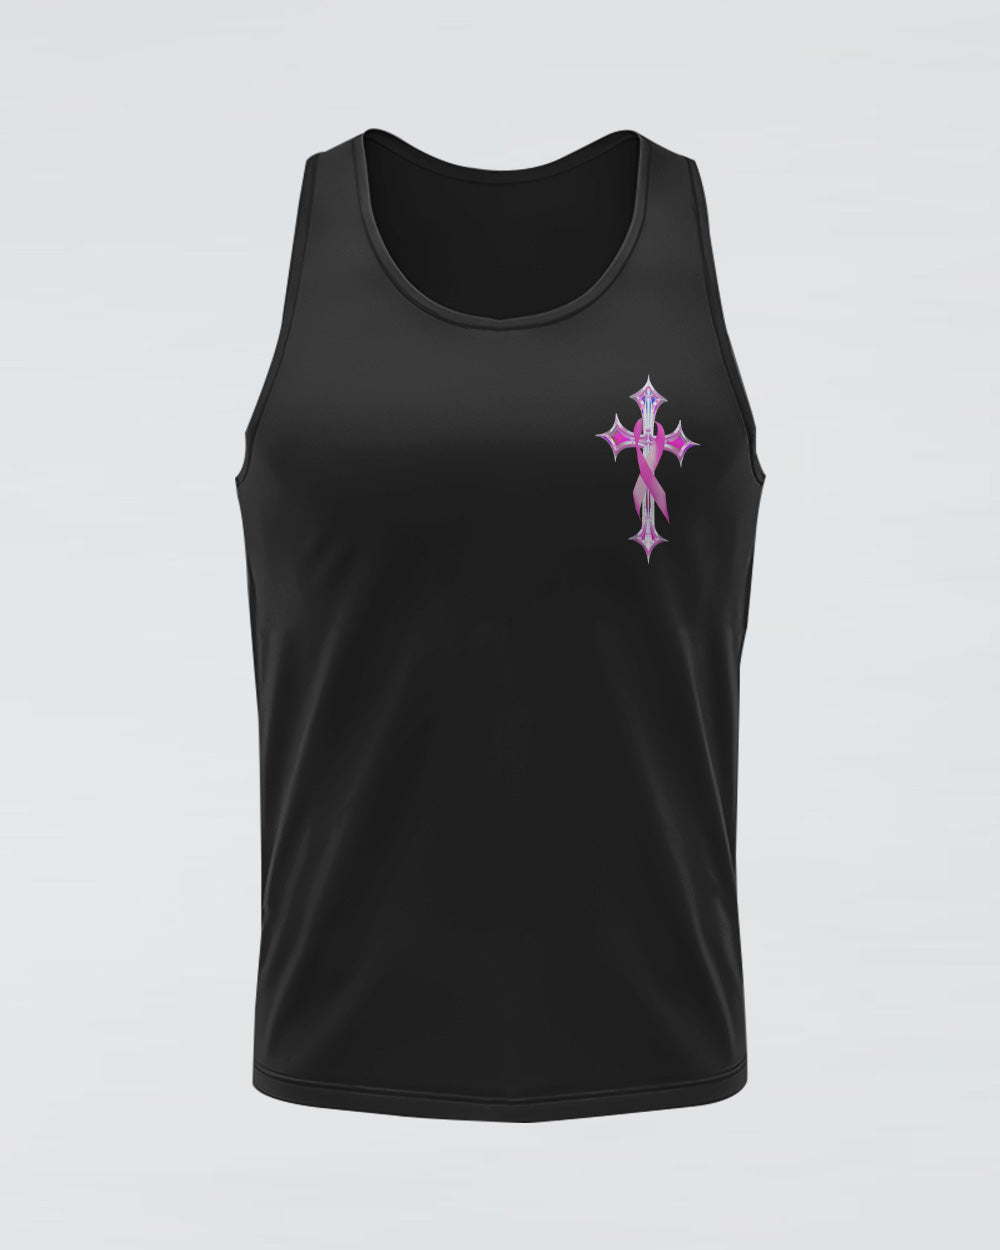 Faith Hope Love Cross Cancer Pink Holo Ribbons Flag Women's Breast Cancer Awareness Tanks